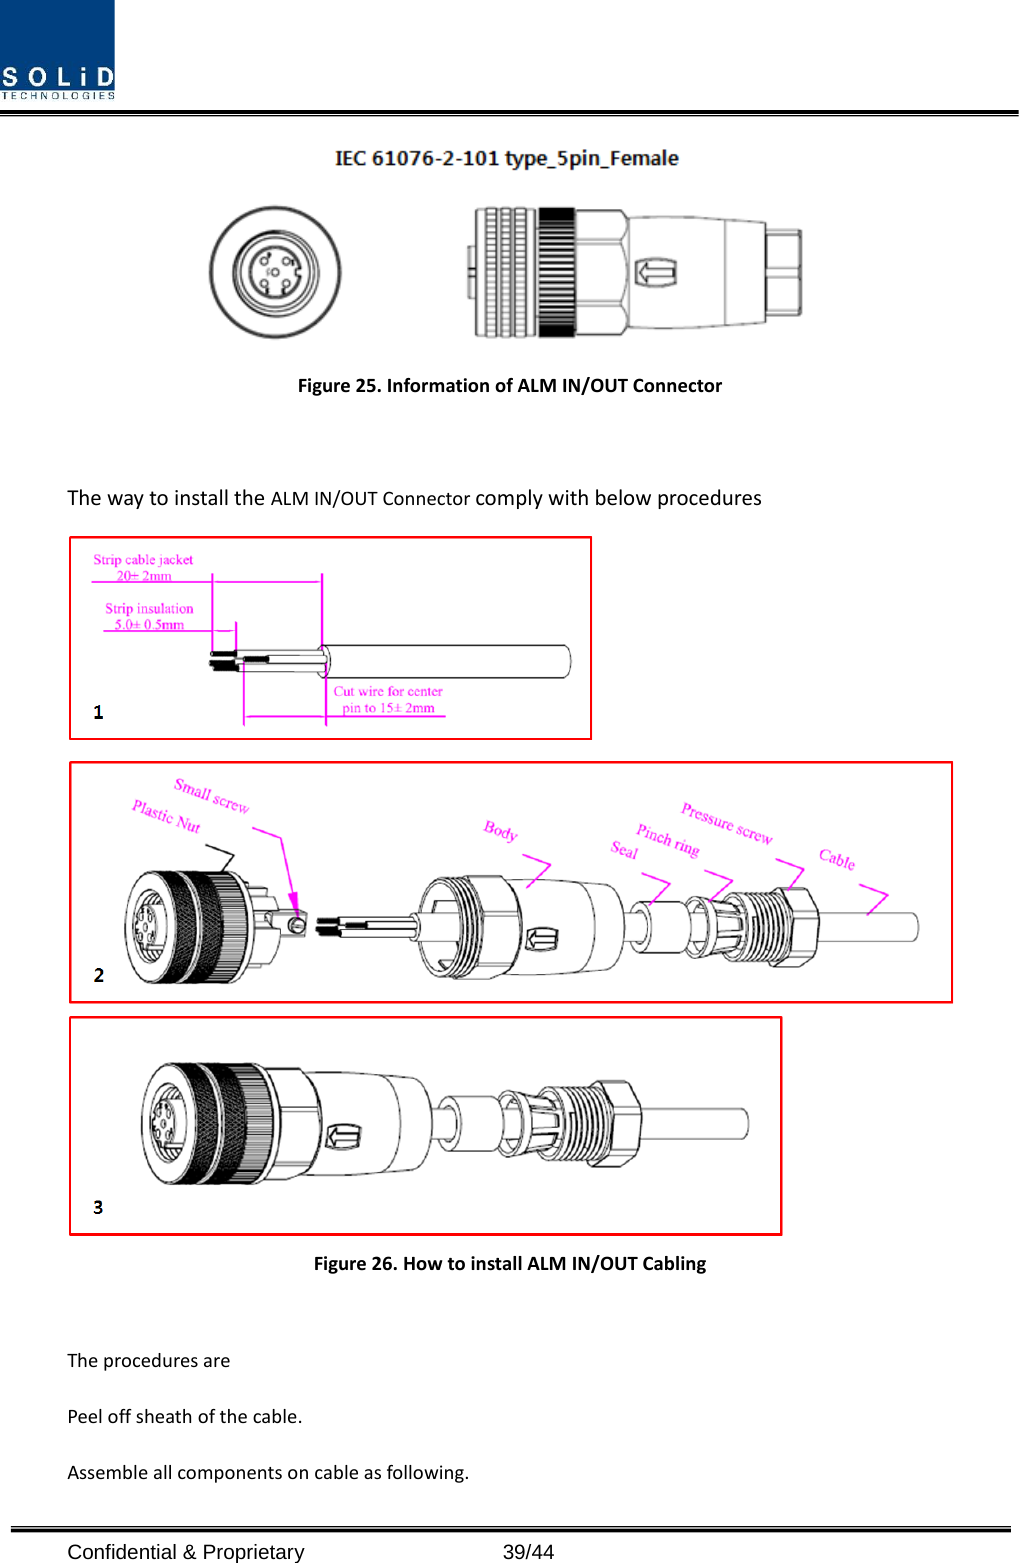  Confidential &amp; Proprietary                   39/44  Figure 25. Information of ALM IN/OUT Connector  The way to install the ALM IN/OUT Connector comply with below procedures    Figure 26. How to install ALM IN/OUT Cabling  The procedures are Peel off sheath of the cable. Assemble all components on cable as following. 